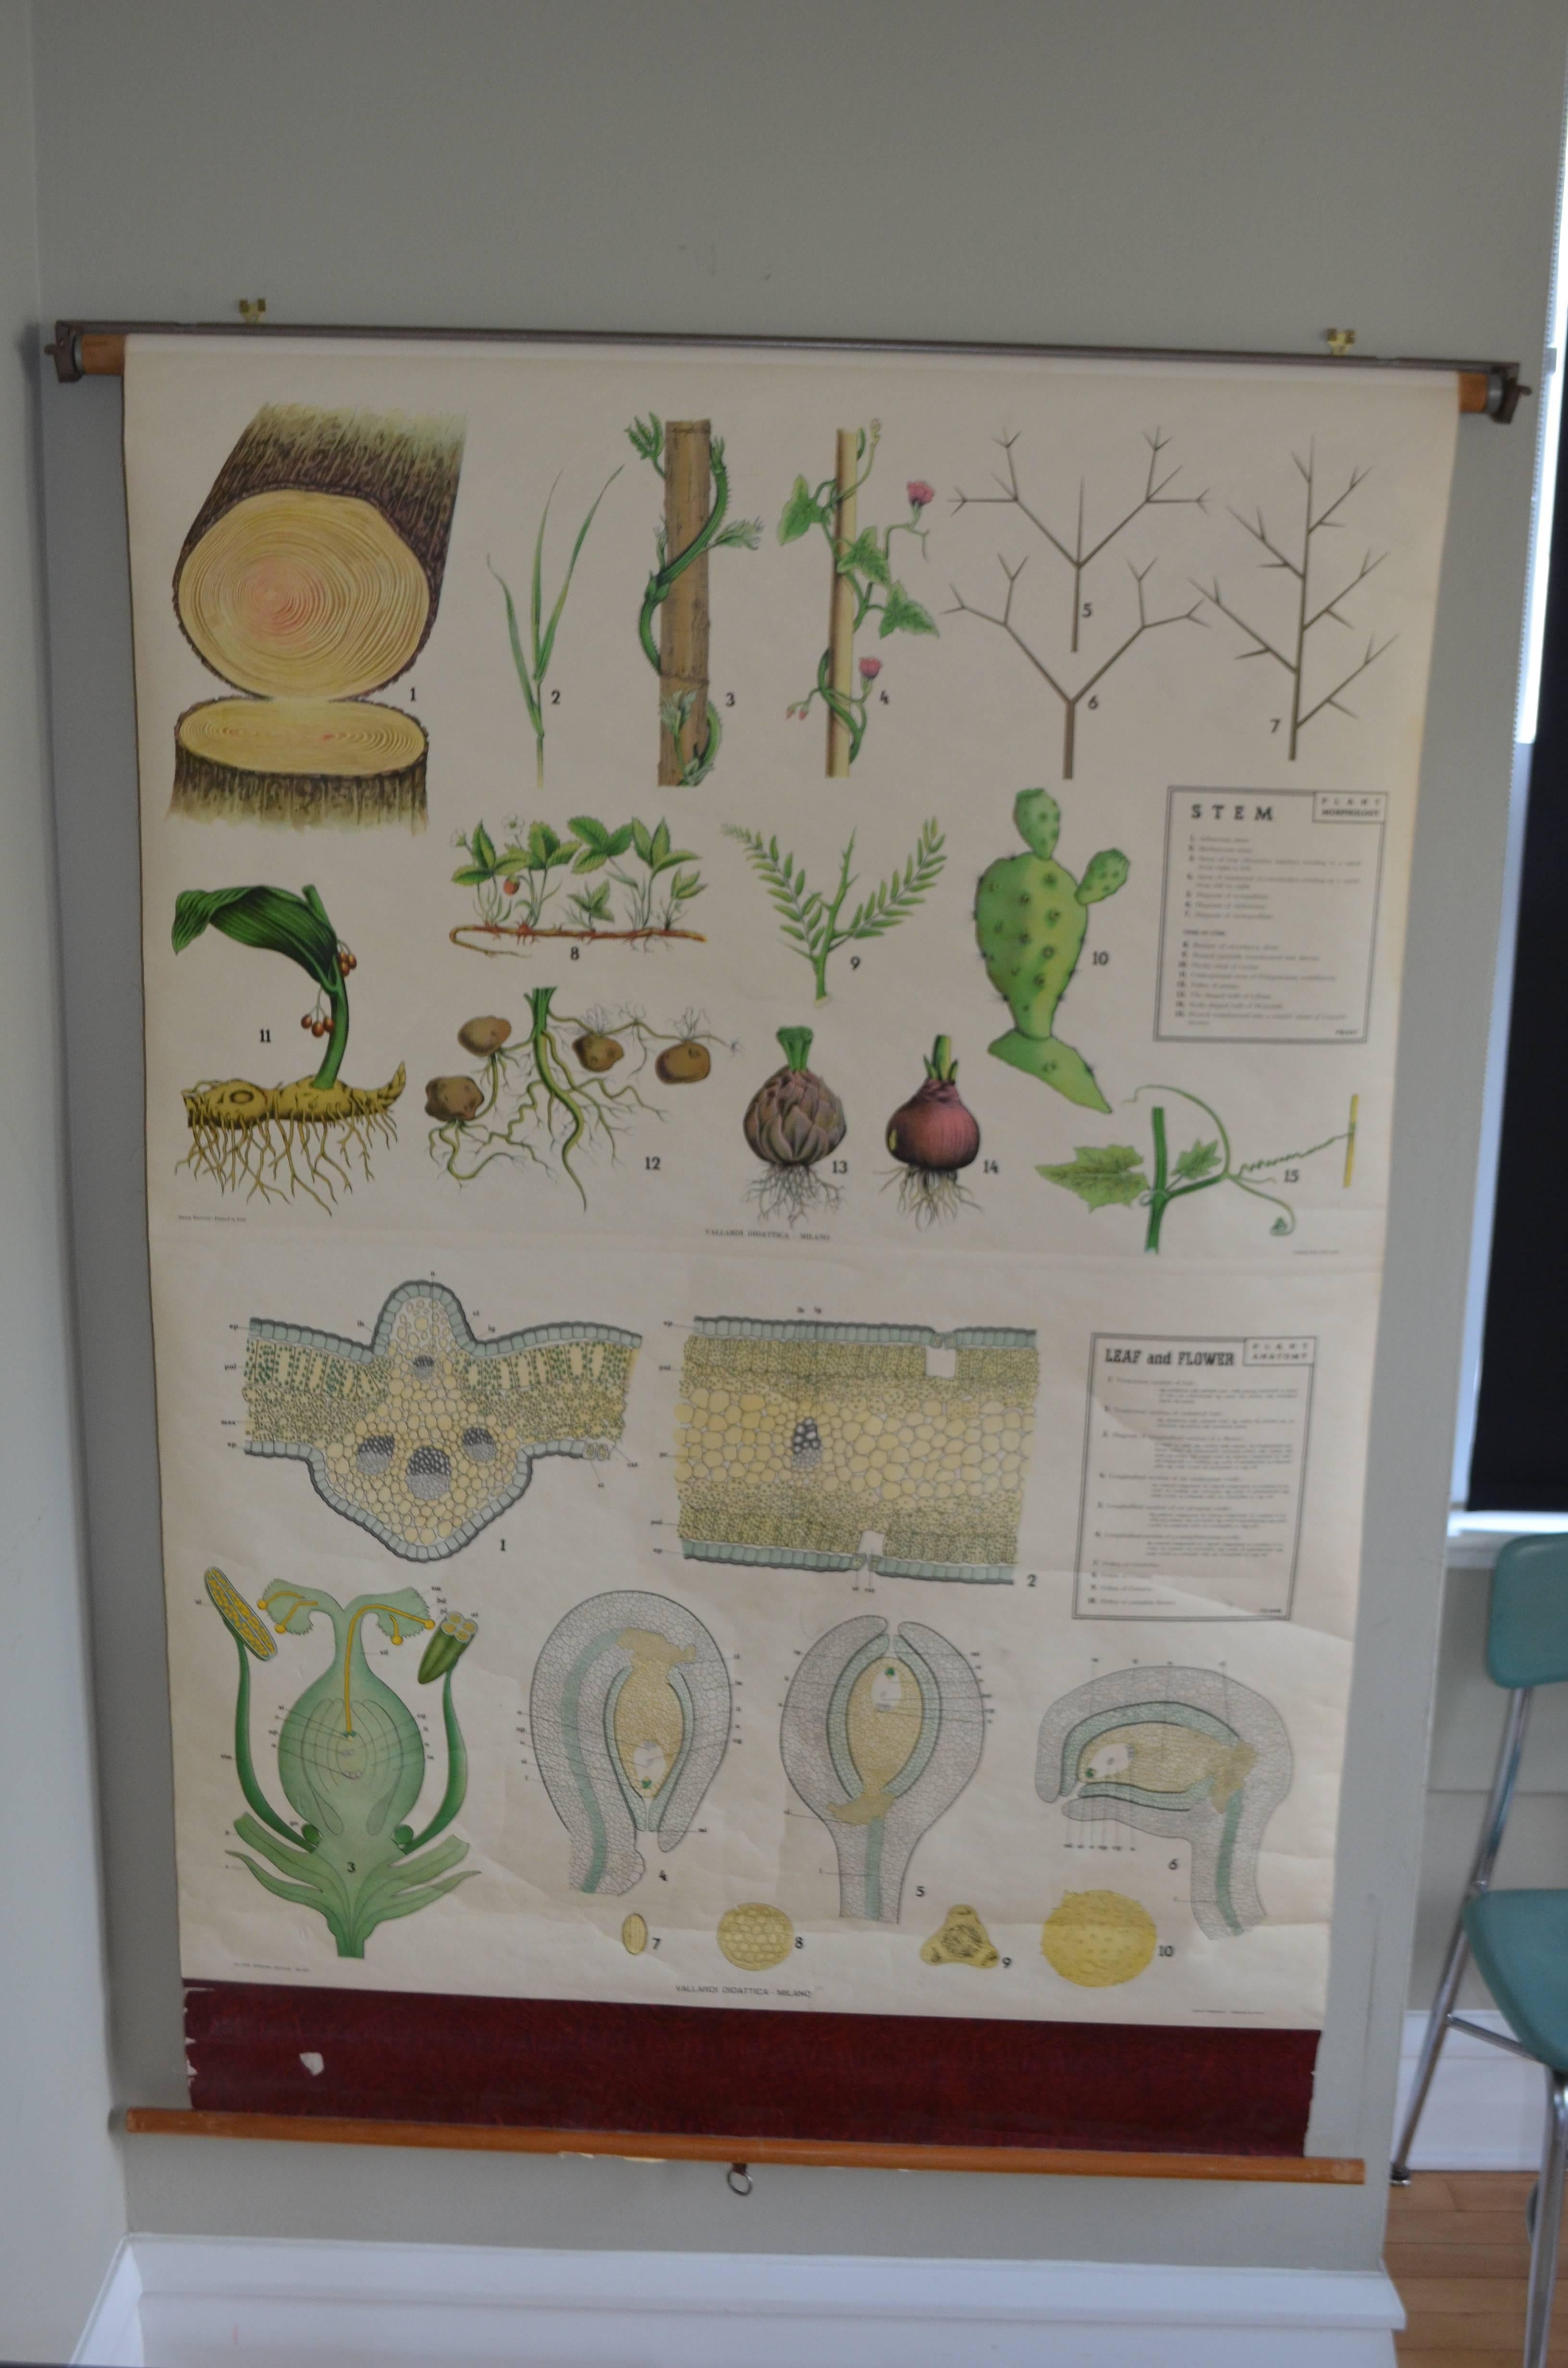 Map of The Stem, Leaf and Flower from the biology classroom. Beautifully-rendered illustrations of the various stages of plant life development. Printed in Milan, Italy in rich, sophisticated litho colors. Mounted on retractable wooden roller for